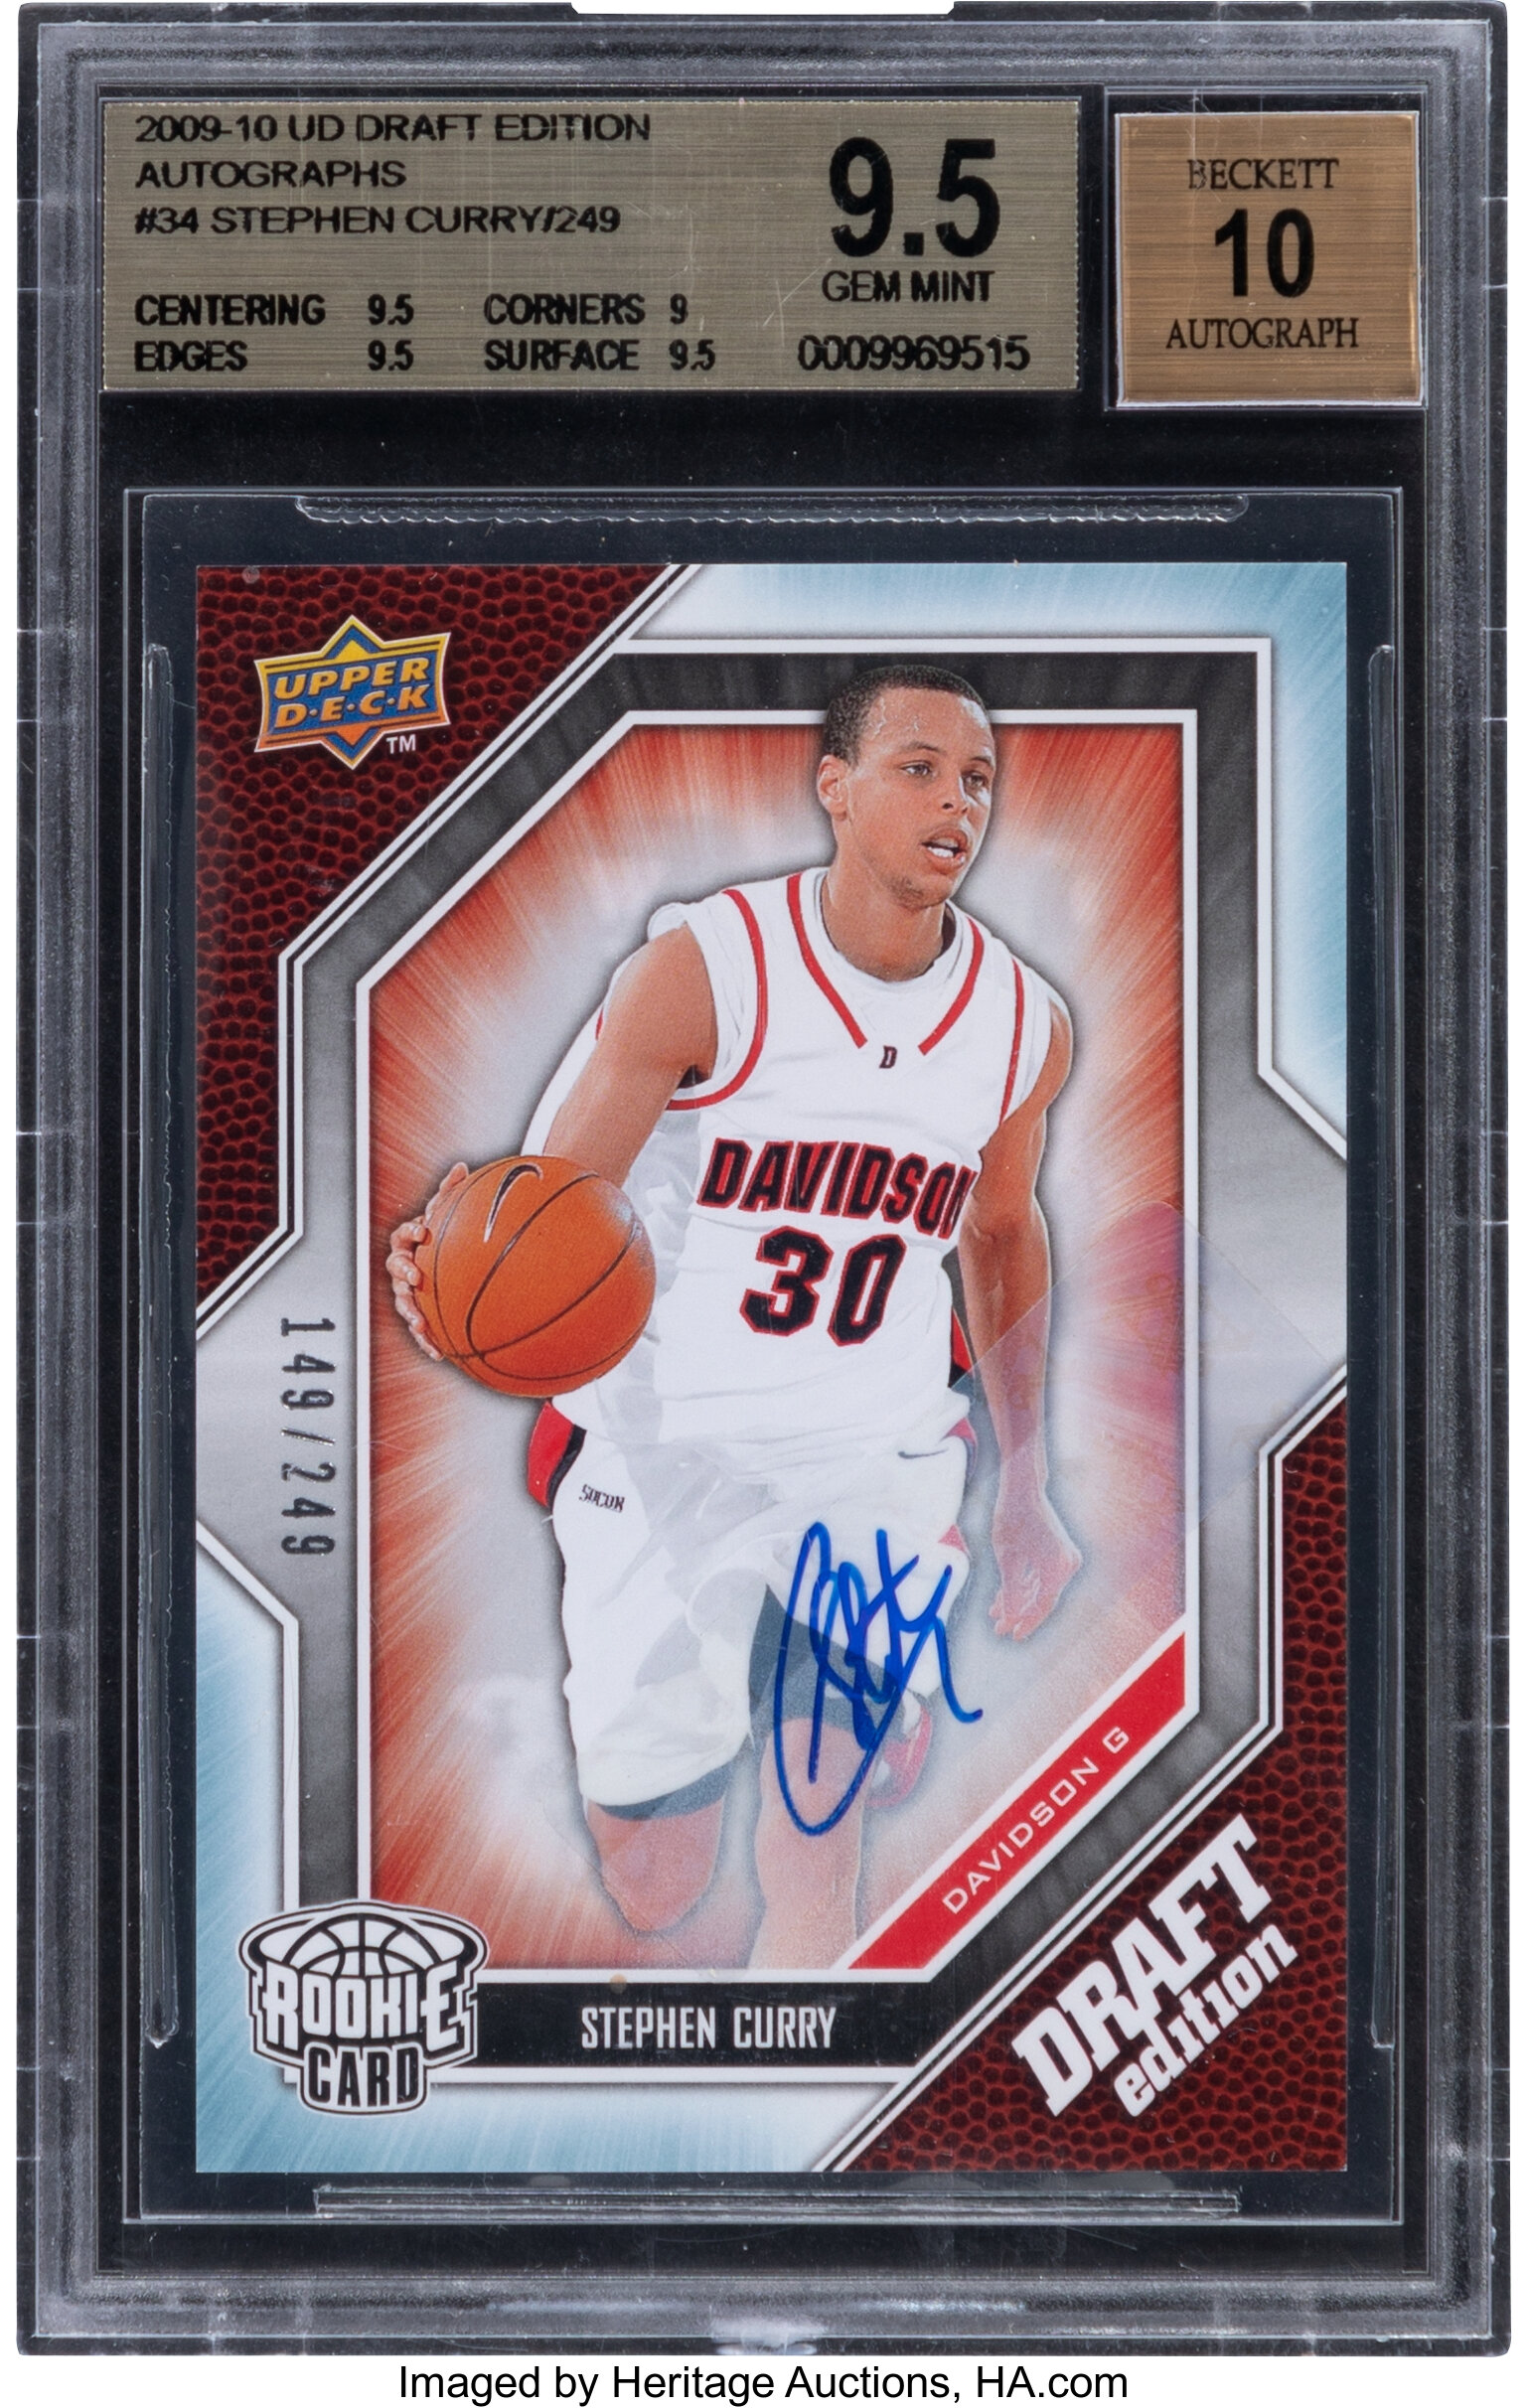 2009 10 Upper Deck Draft Edition Autographs Stephen Curry 34 Bgs Lot 53129 Heritage Auctions